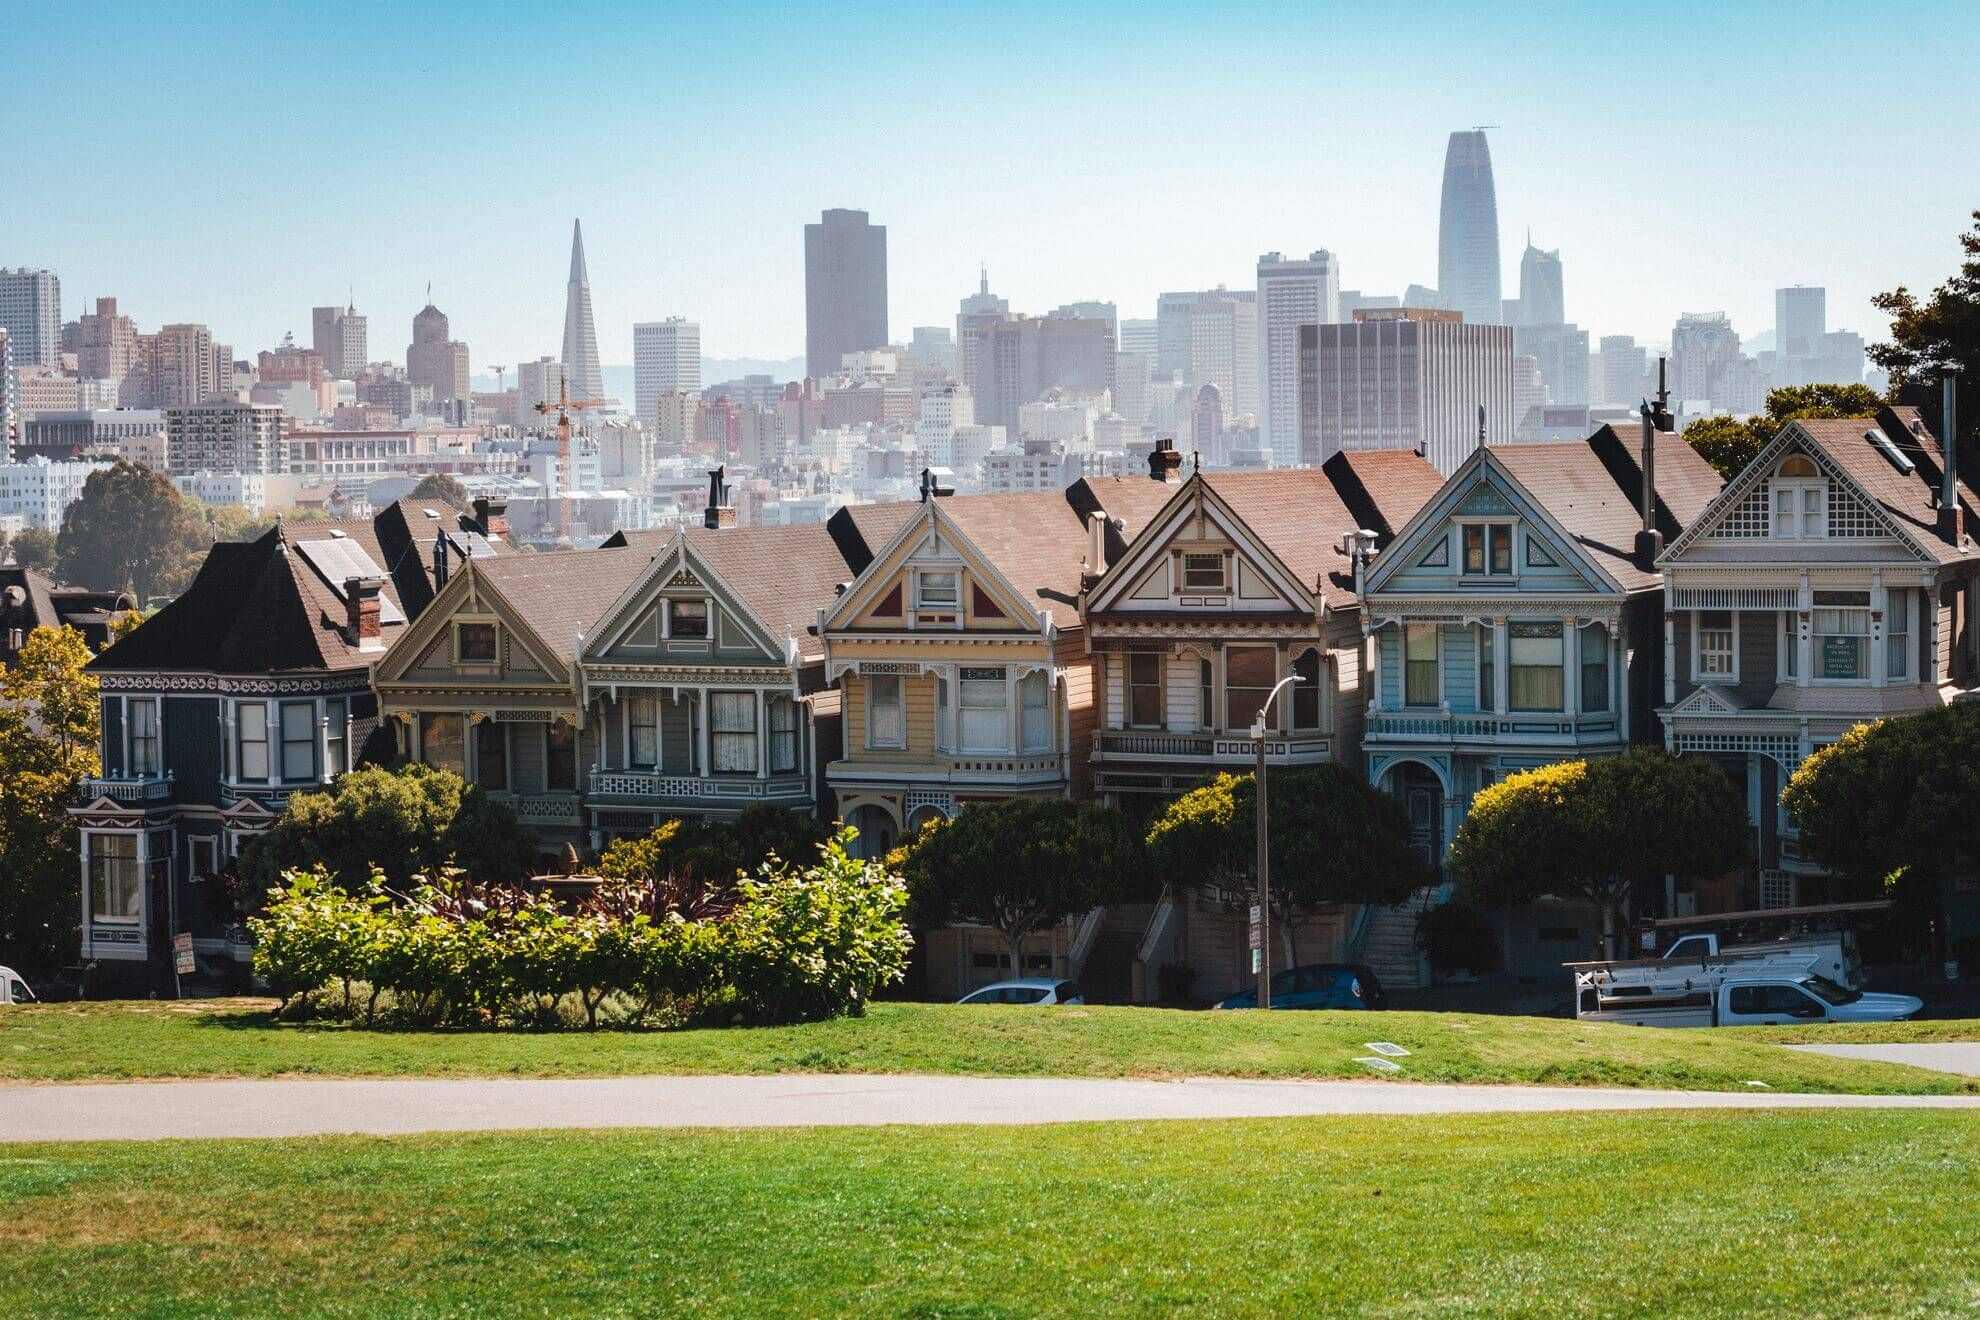 a neighborhood with houses, metropolitan area of san francisco in the background